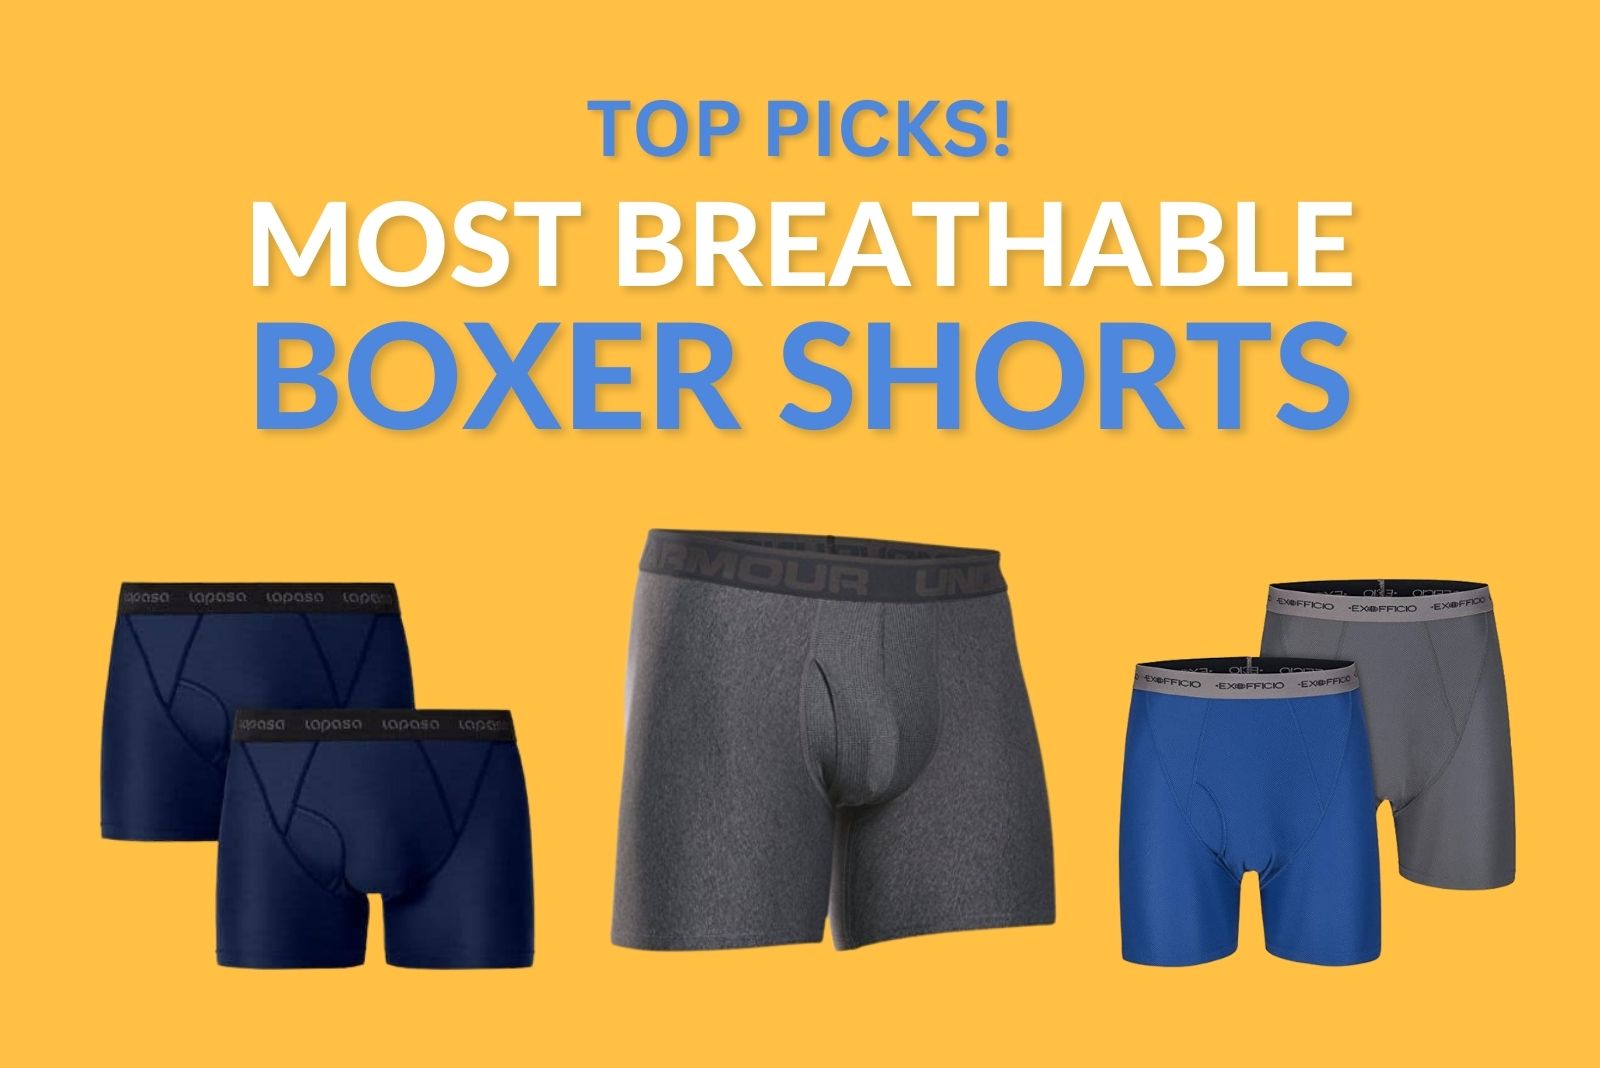 https://discerningcyclist.com/wp-content/uploads/2020/03/best-breathable-boxers-cycling-cyclists.jpg